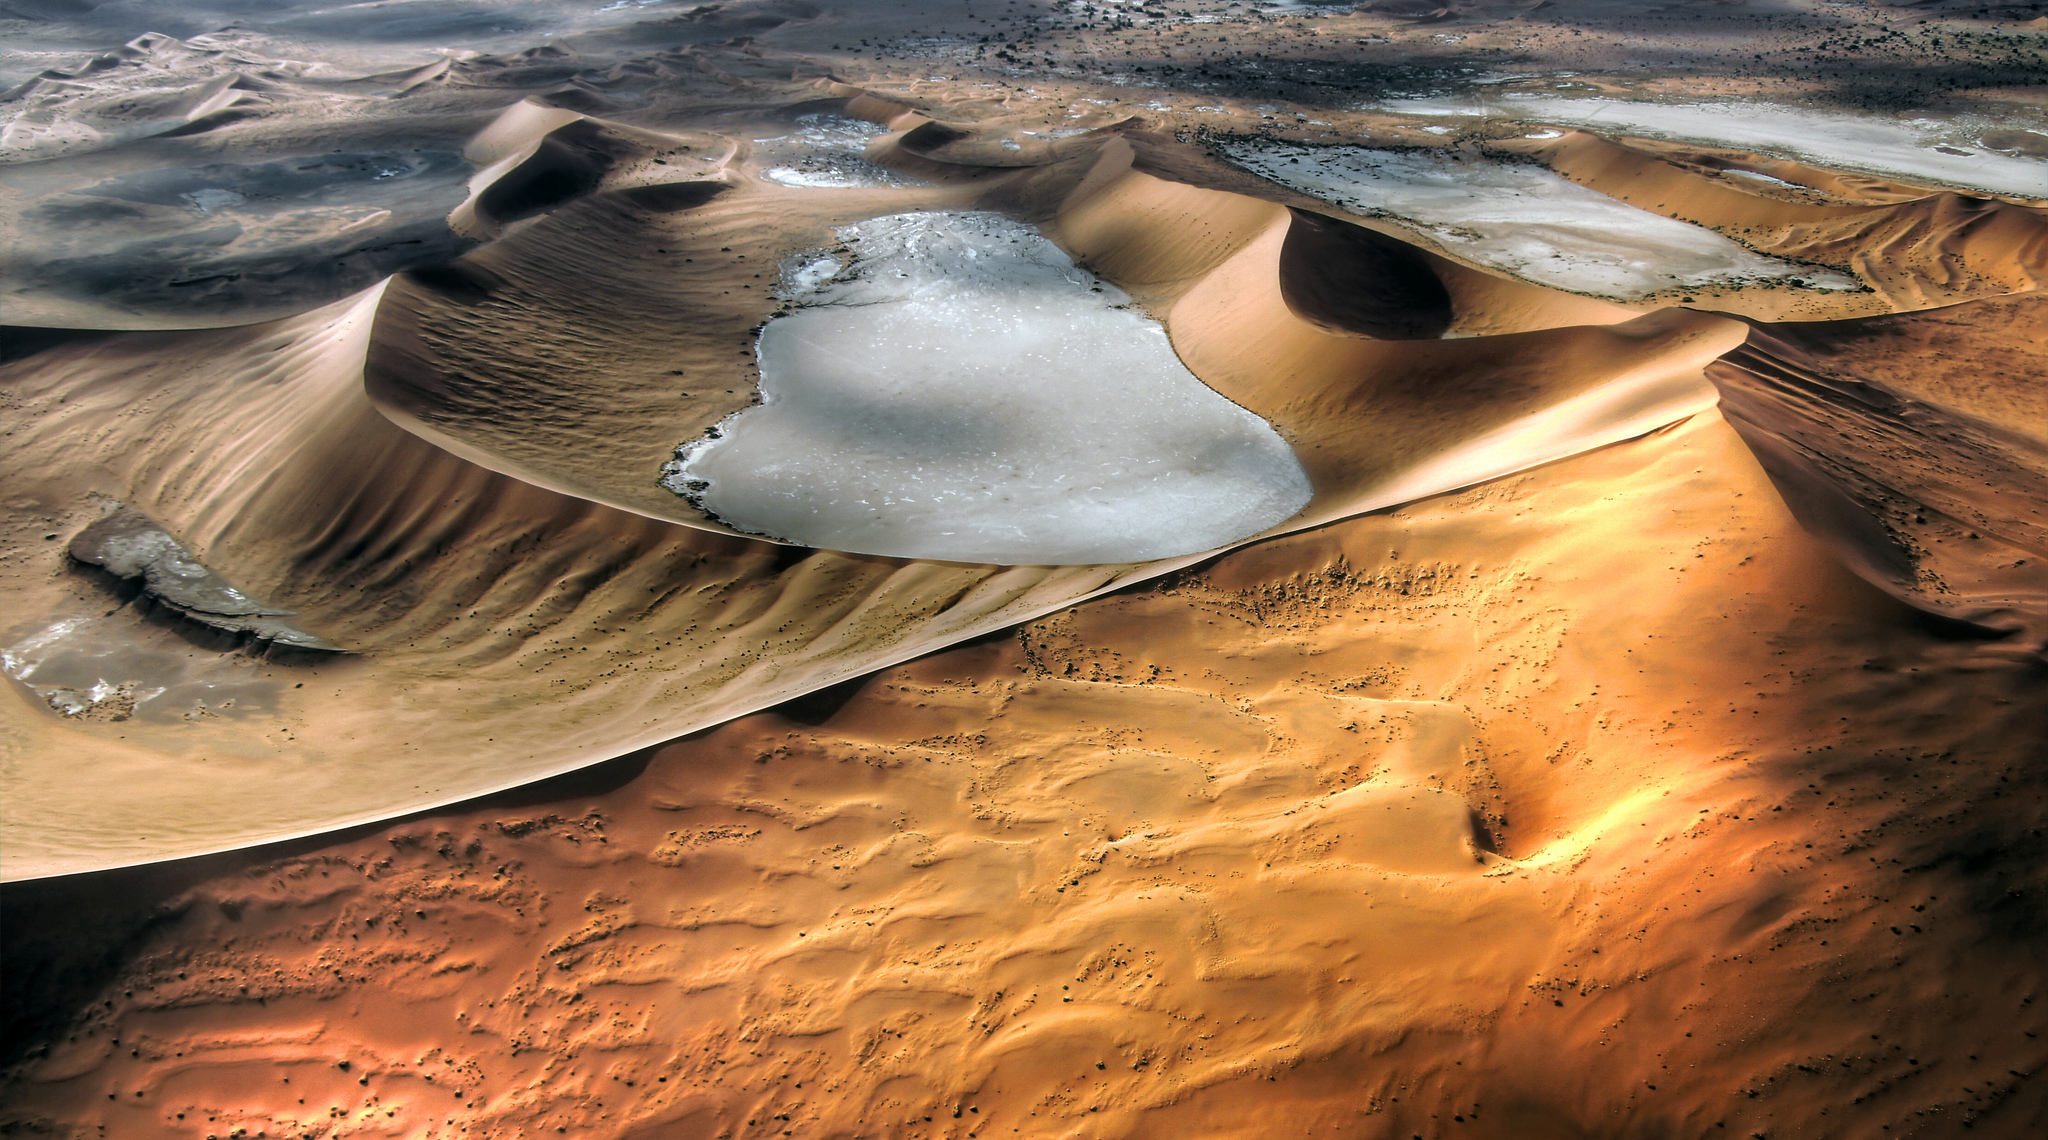 Namib – The Only Coastal Desert in the World